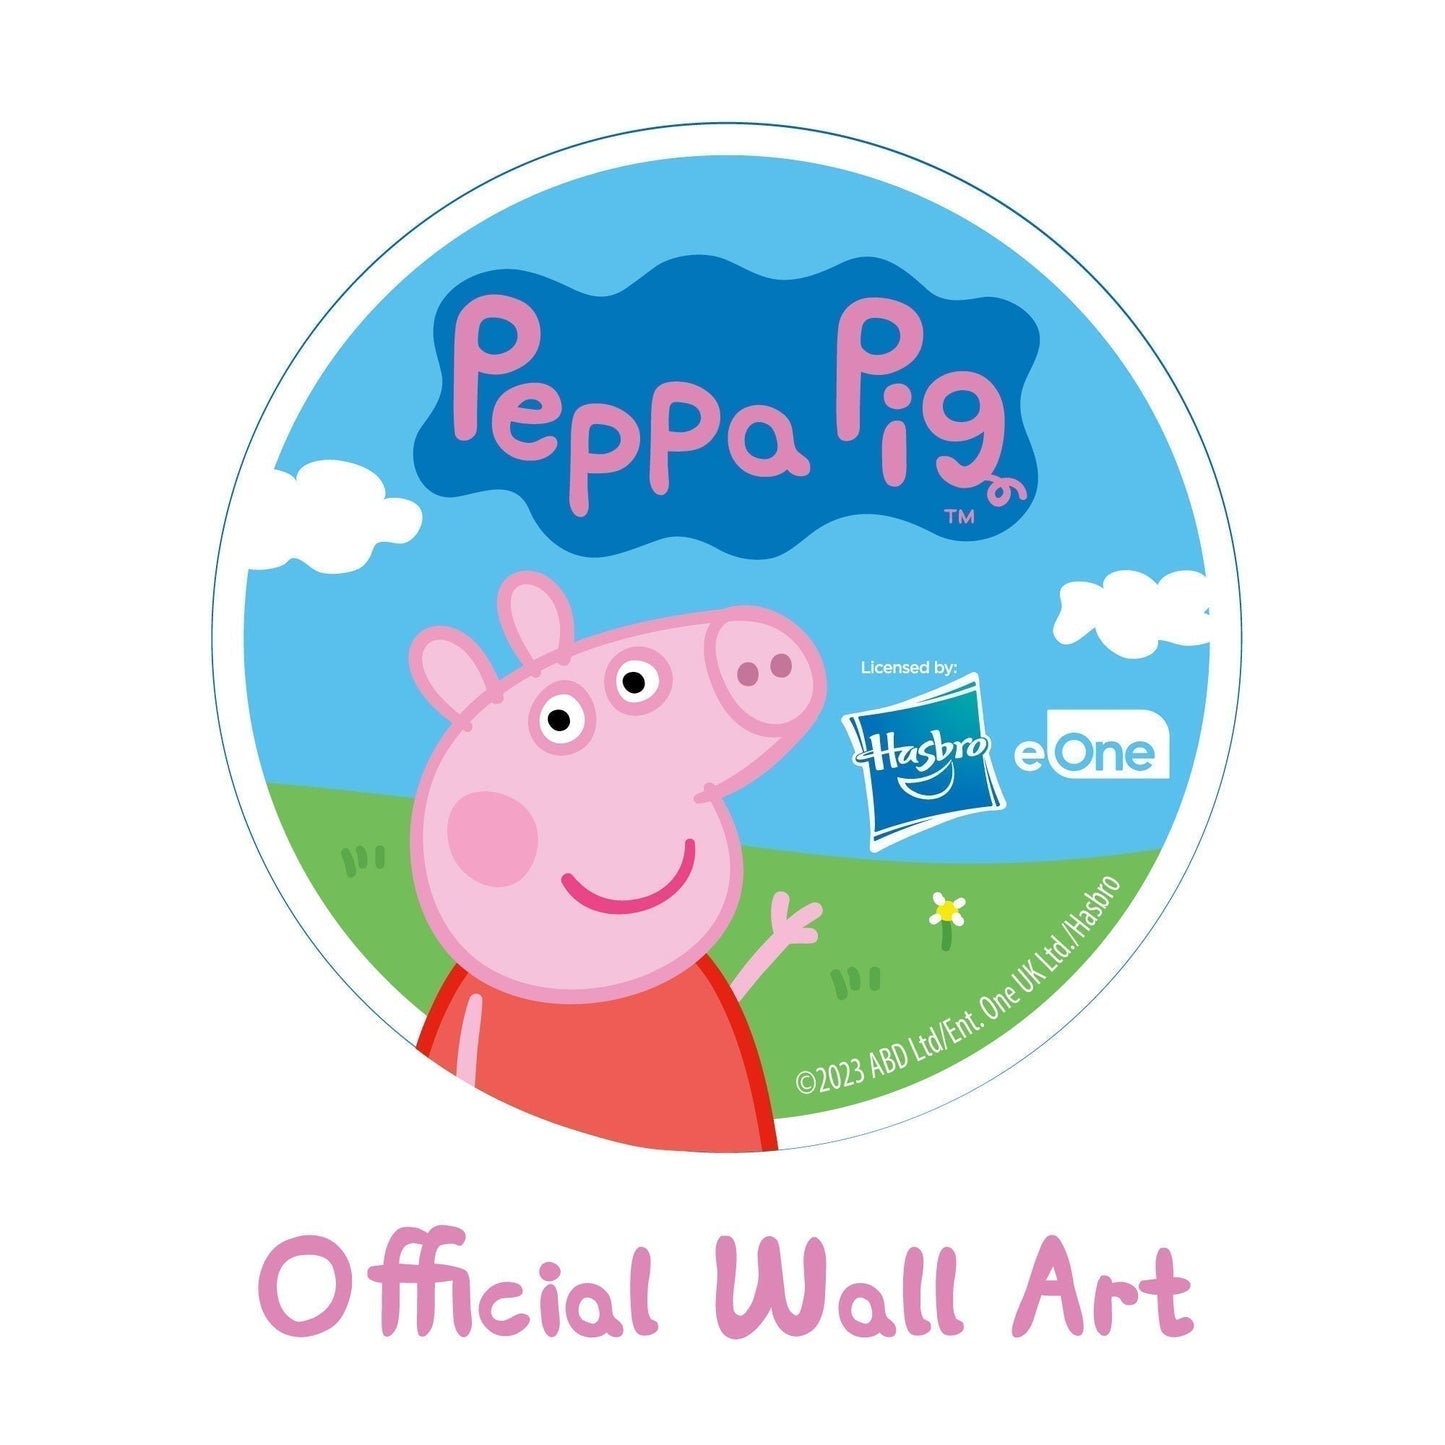 Peppa Pig Print - Peppa and Suzy Rainbow Heart and Clouds Poster Wall Art